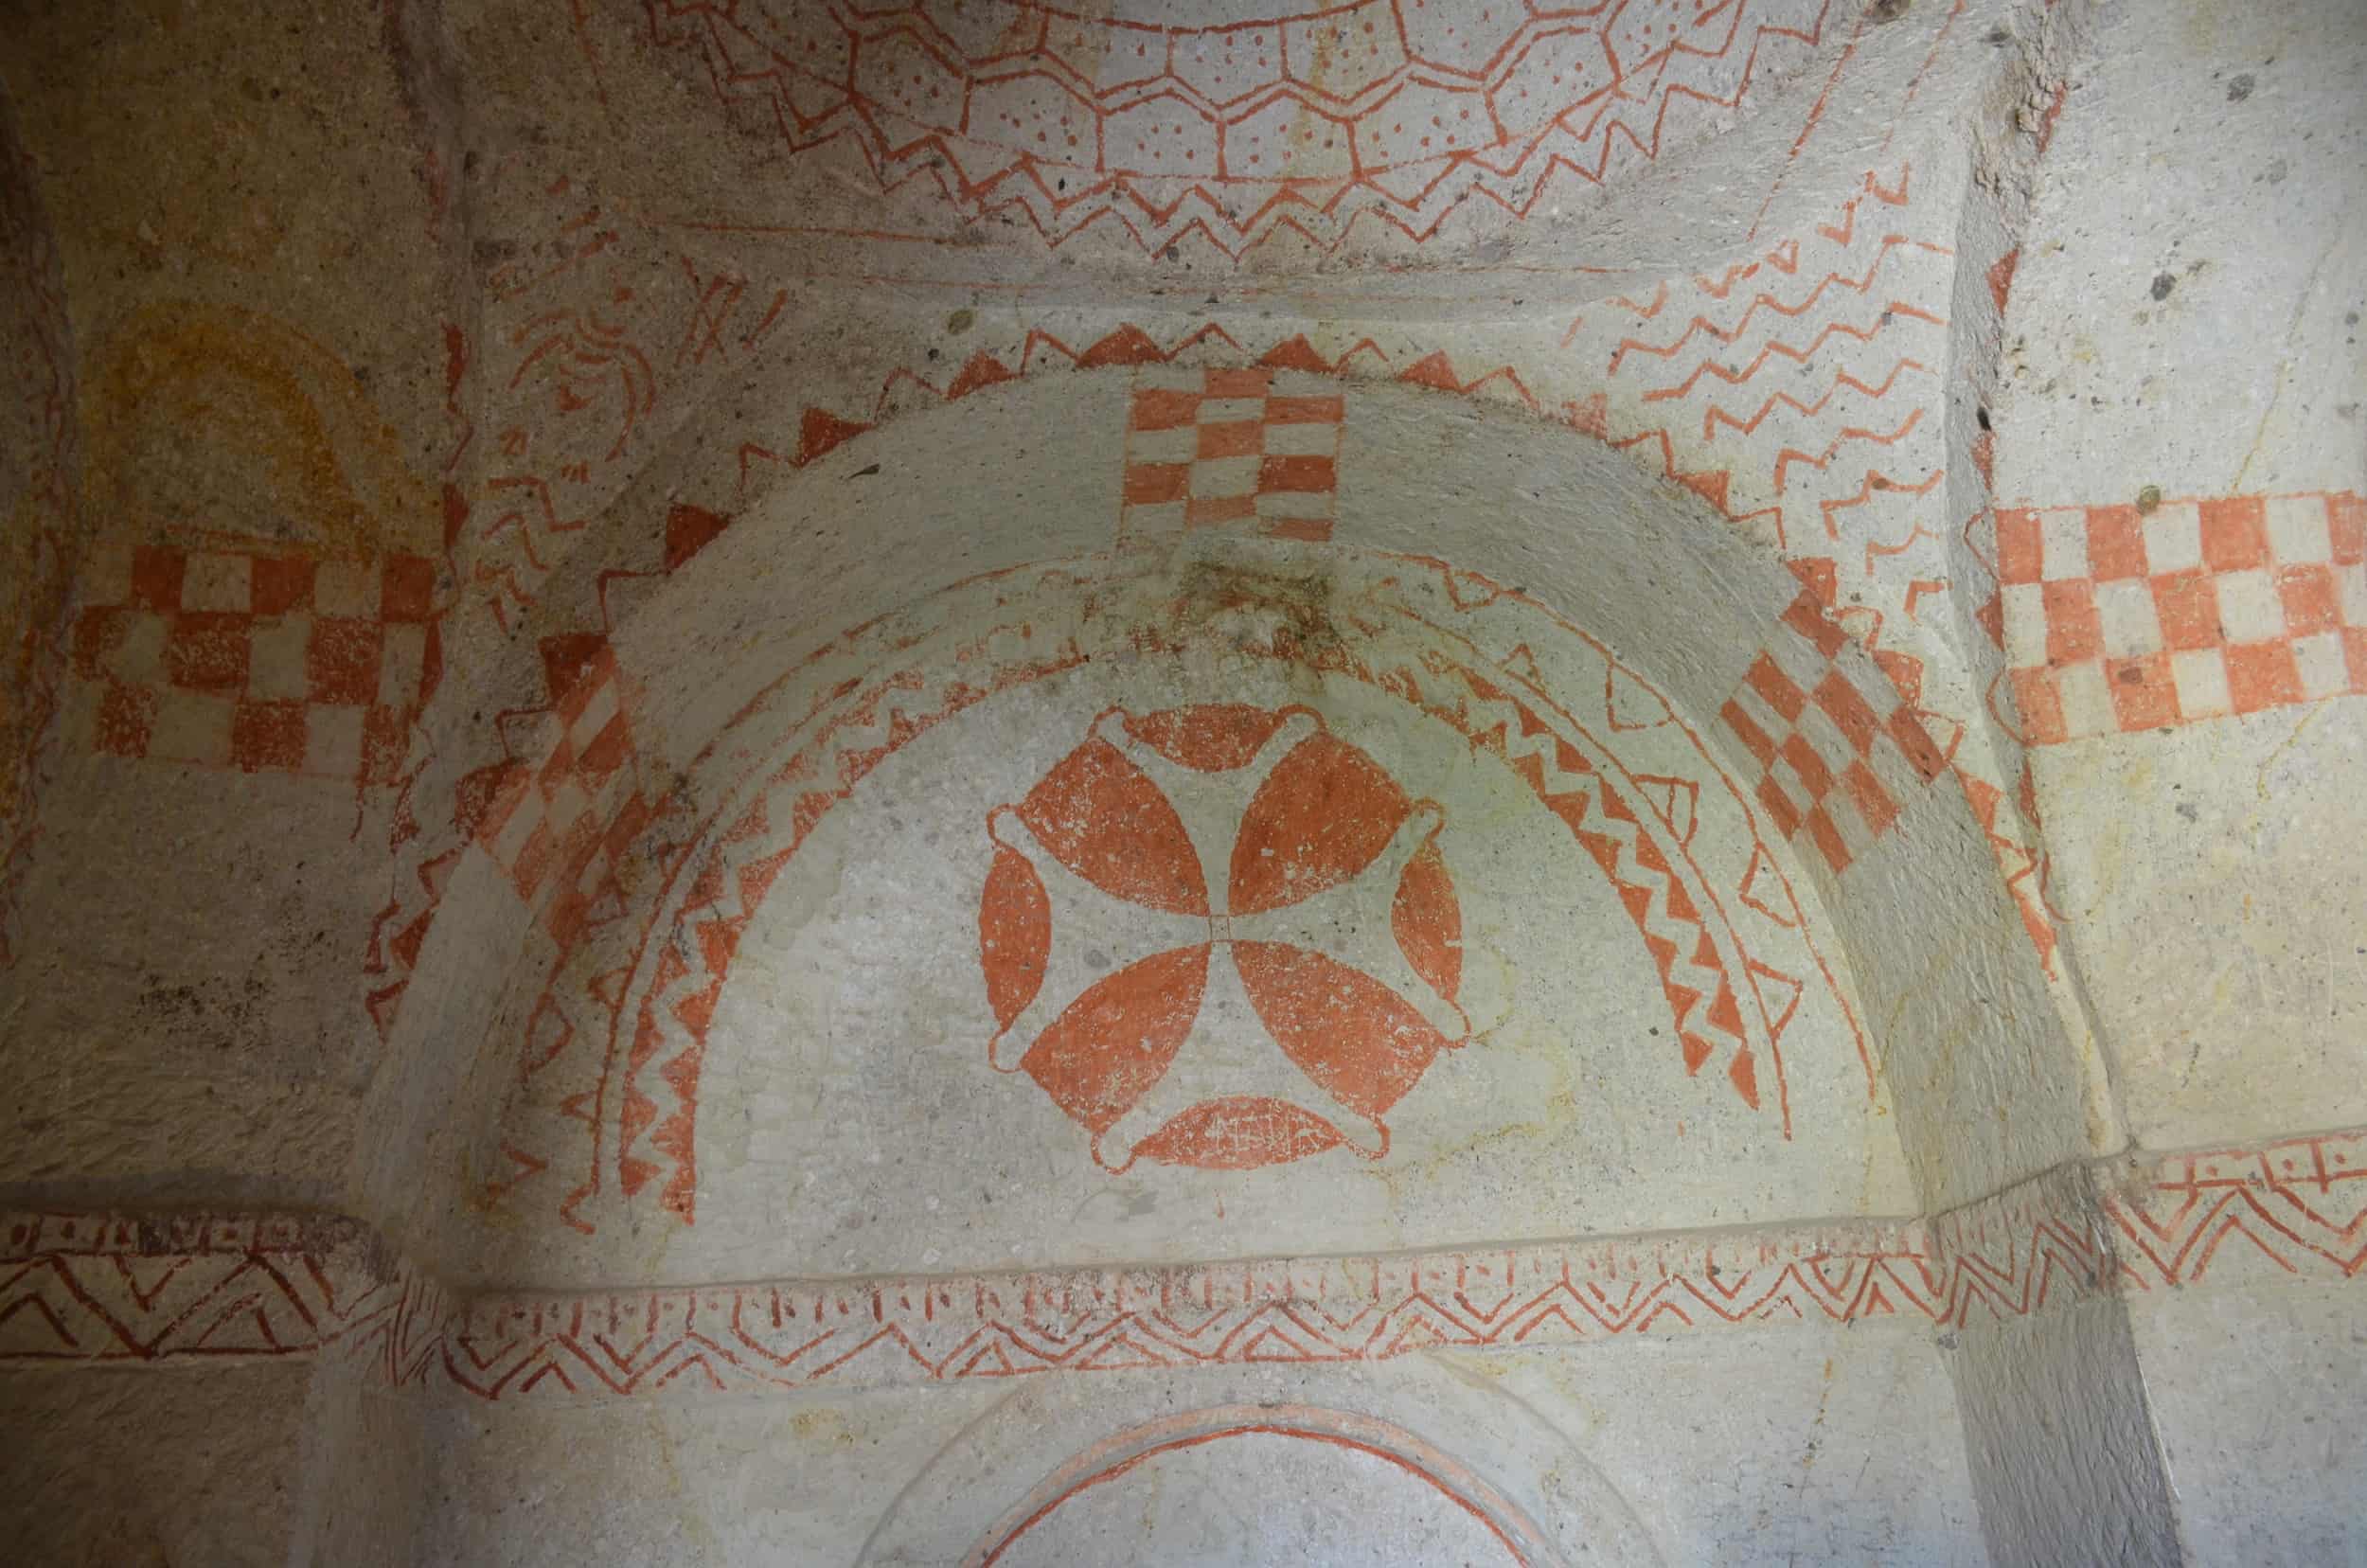 Maltese cross and decorations in the Nameless Chapel at Göreme Open Air Museum in Cappadocia, Turkey